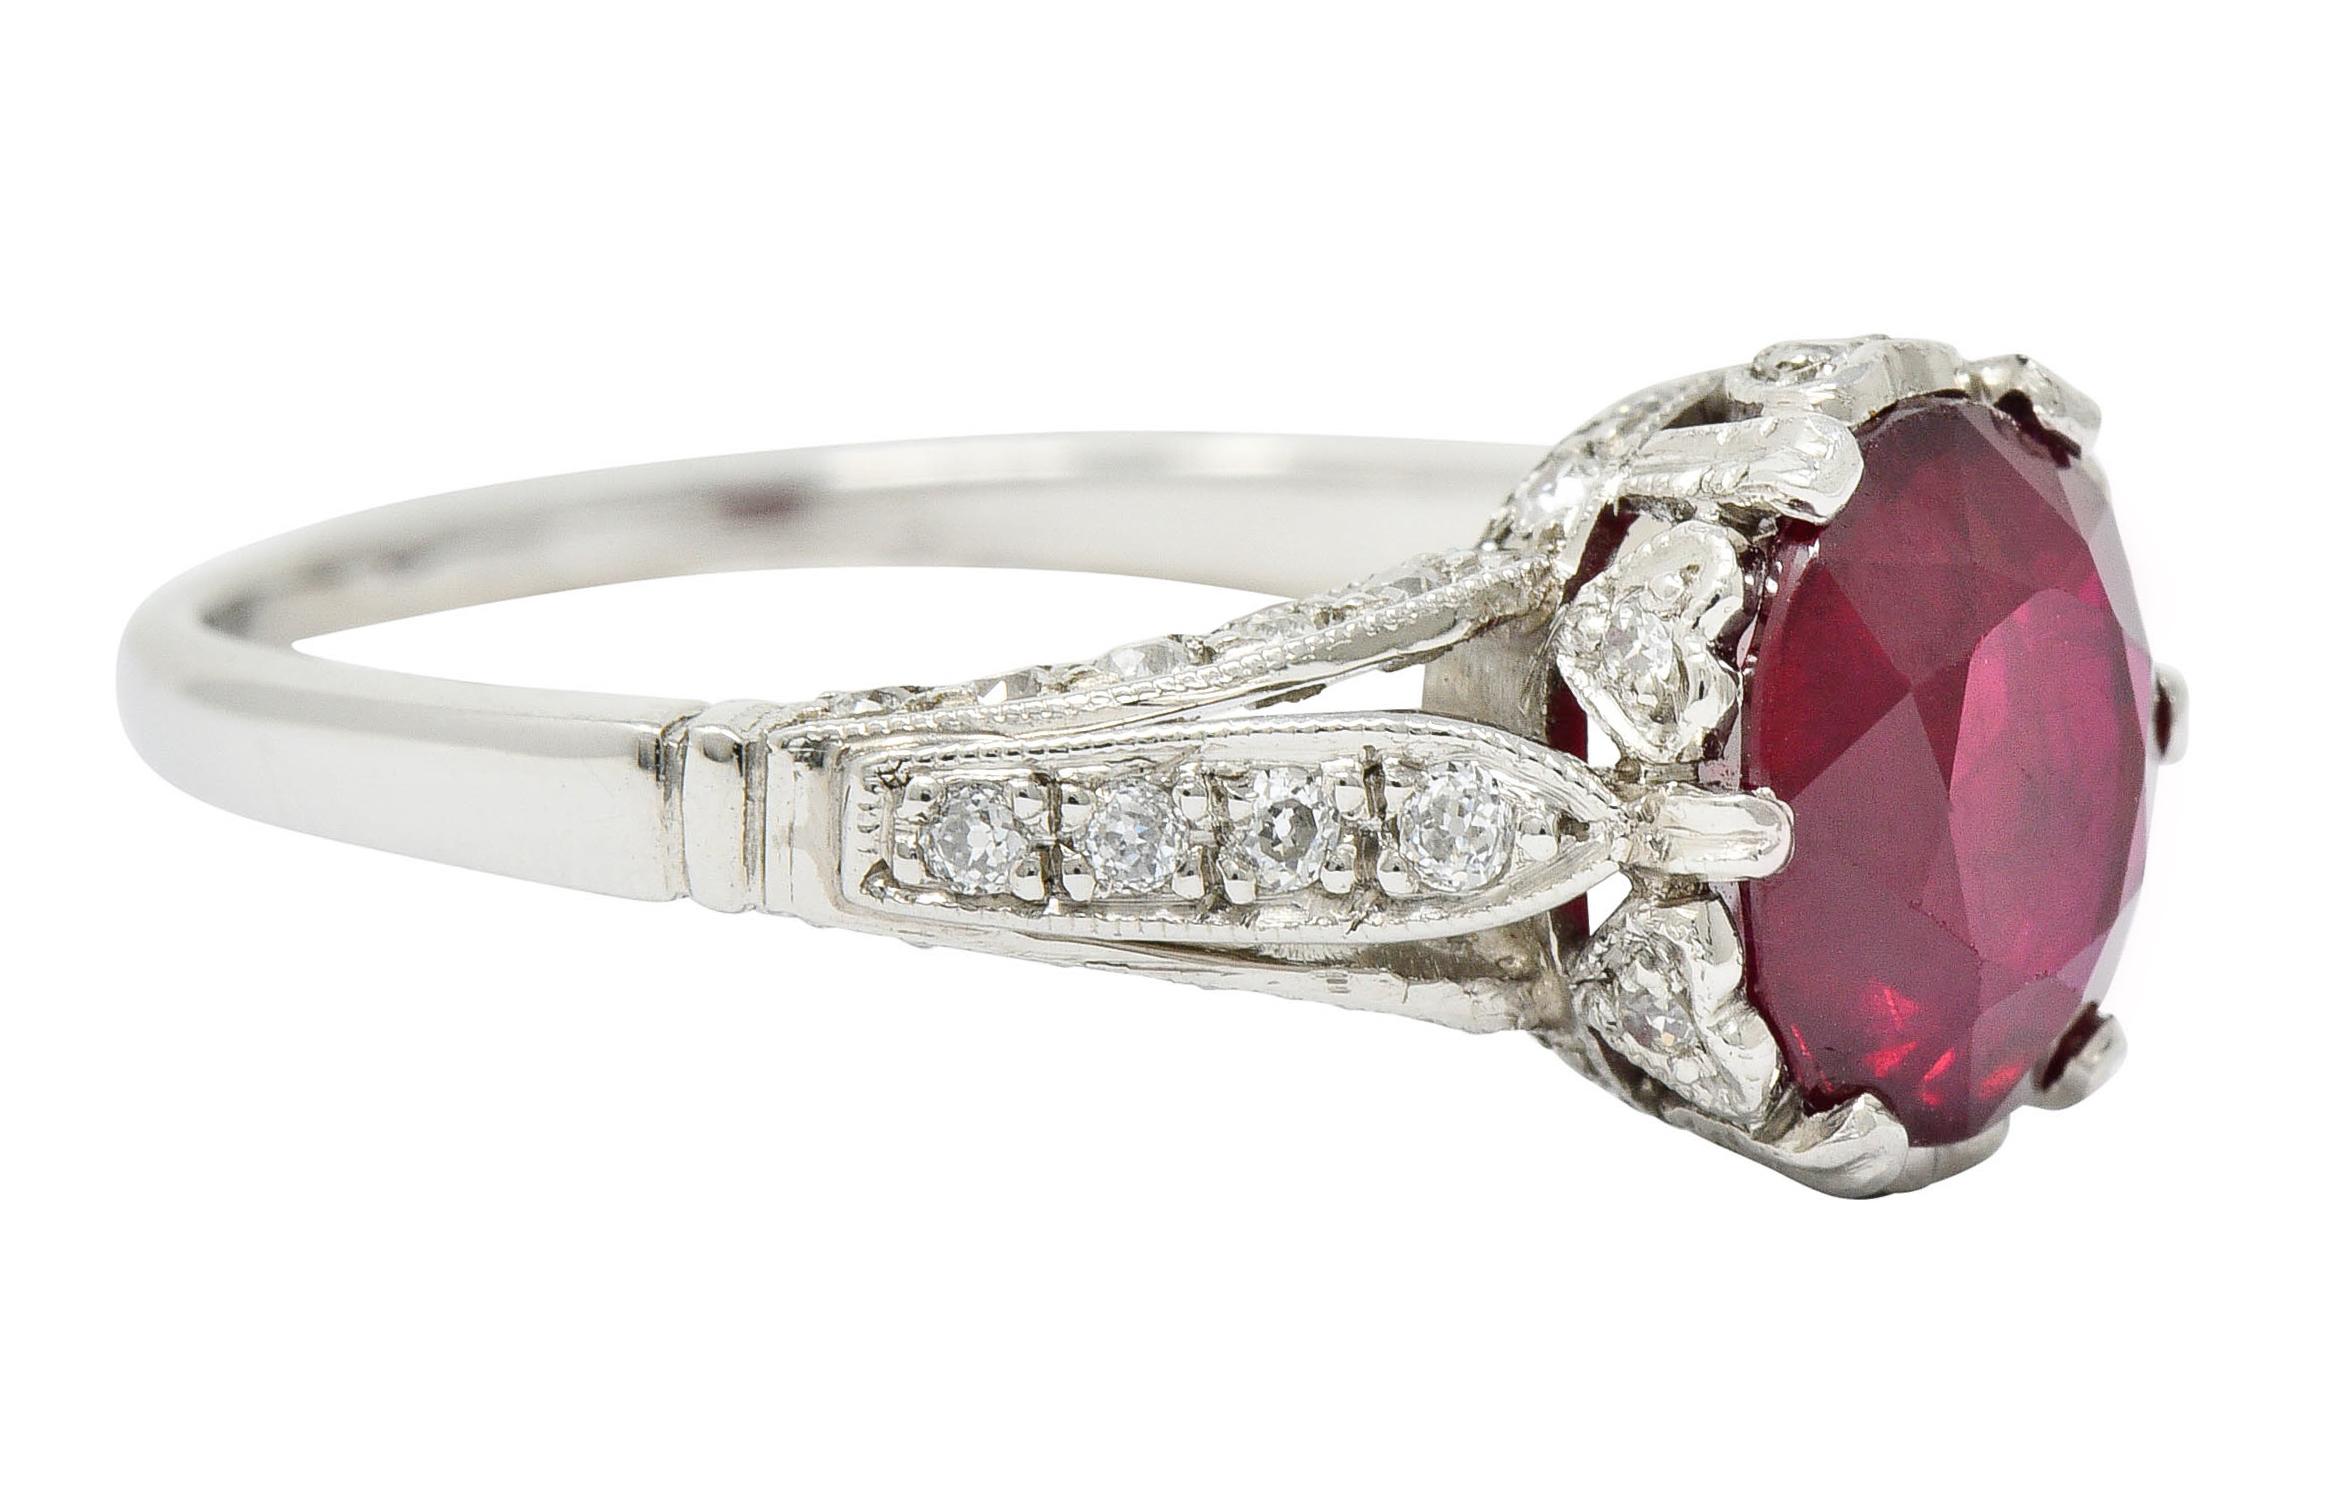 Centering an oval mixed cut Burma Ruby weighing 2.02 carats; vibrantly red in color

Set low in a stylized head featuring a heart motif and flanked by very slight cathedral shoulders

Accented throughout by old European cut diamonds weighing in